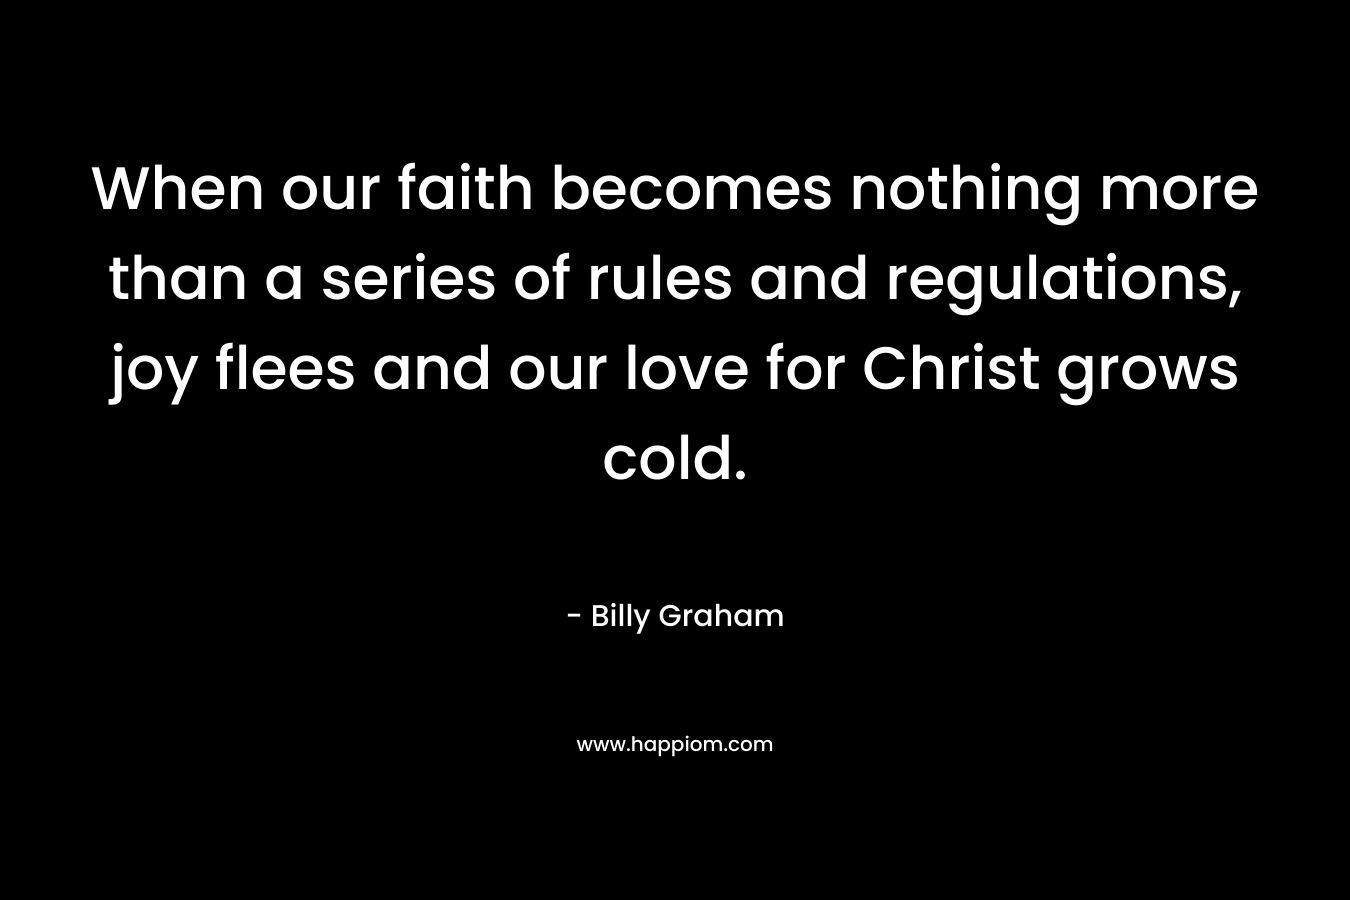 When our faith becomes nothing more than a series of rules and regulations, joy flees and our love for Christ grows cold.